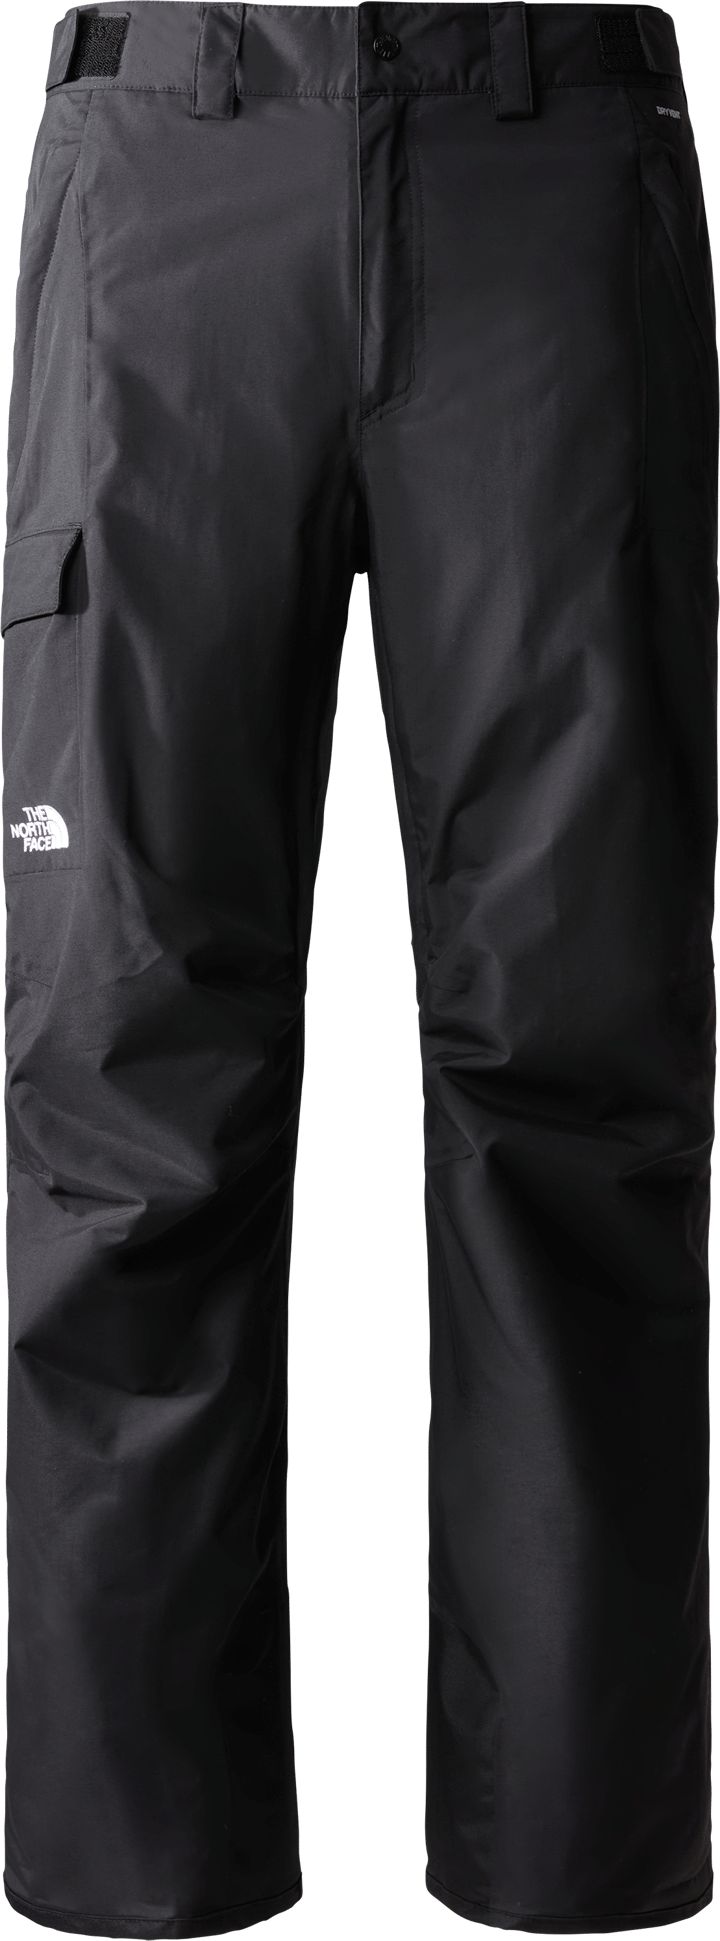 Men's Freedom Insulated Pant Tnf Black The North Face